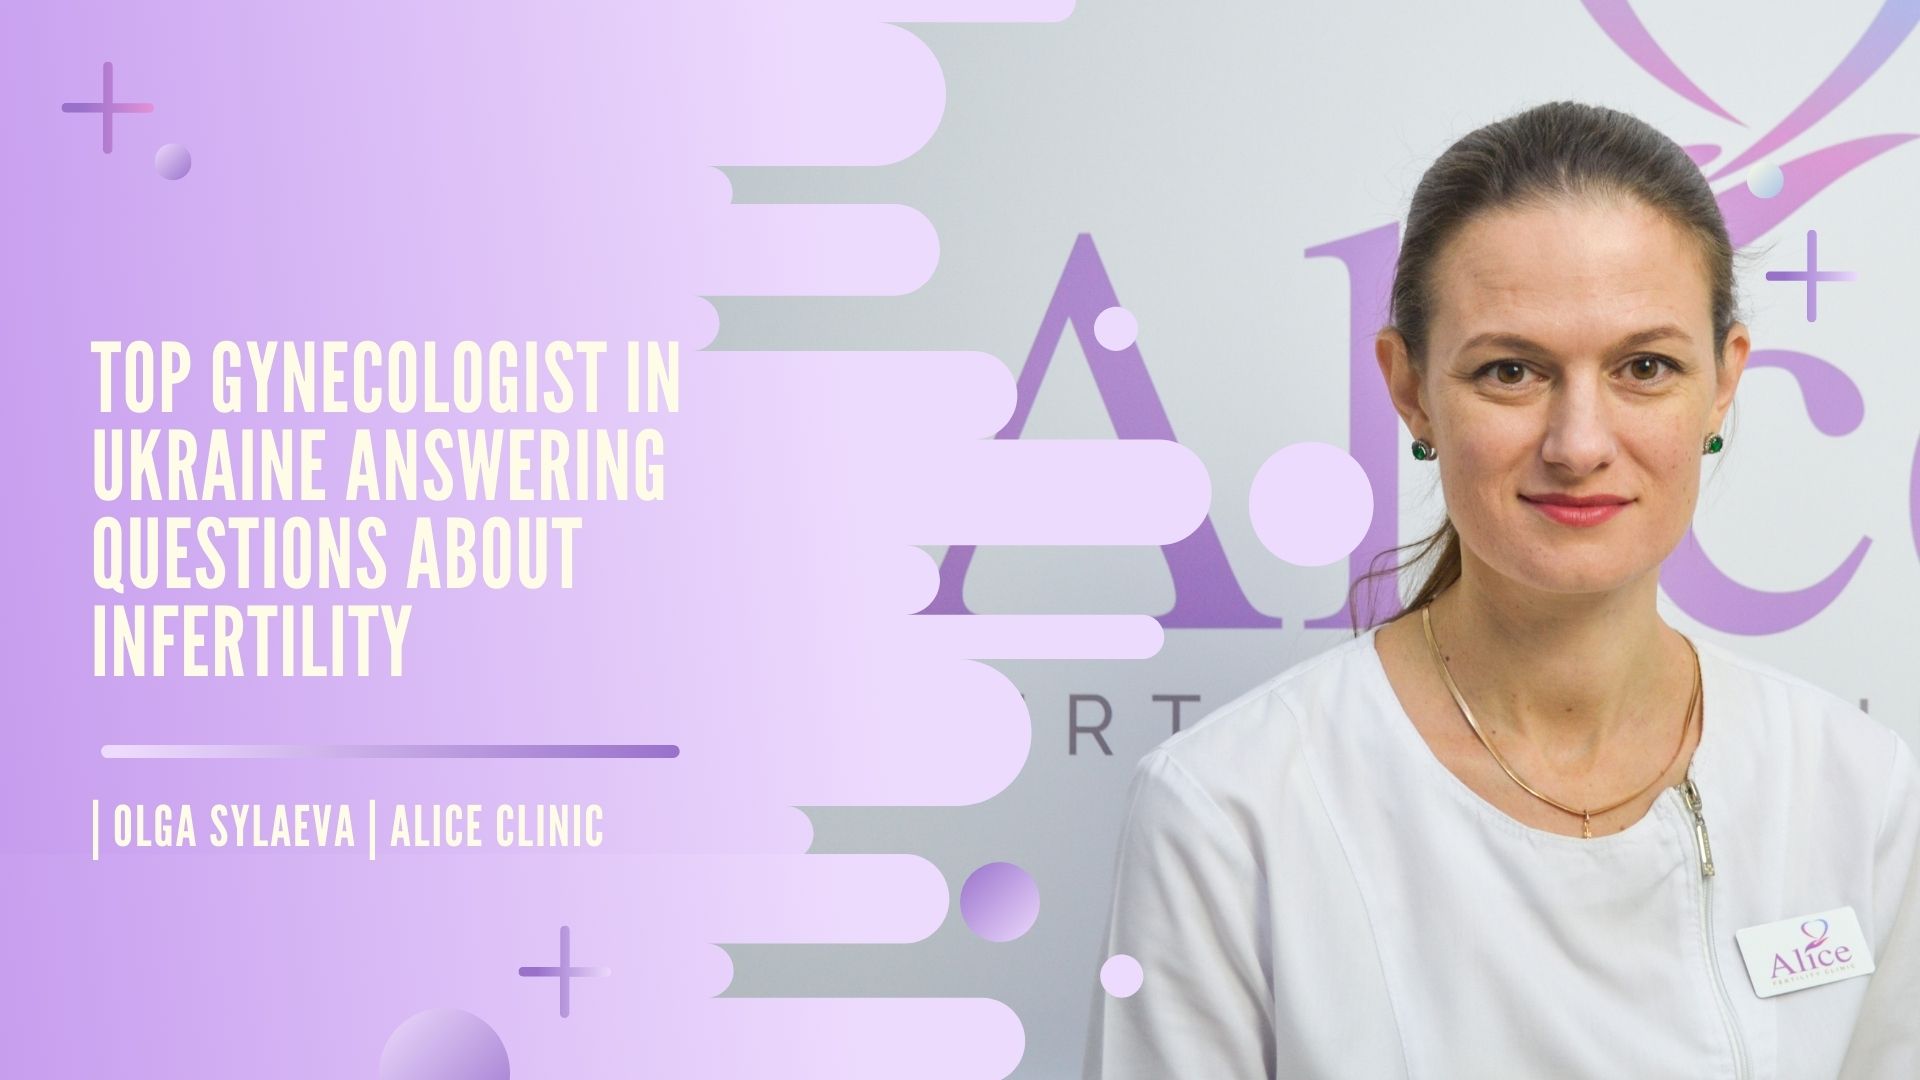 Top Gynecologist in Ukraine answering questions about infertility